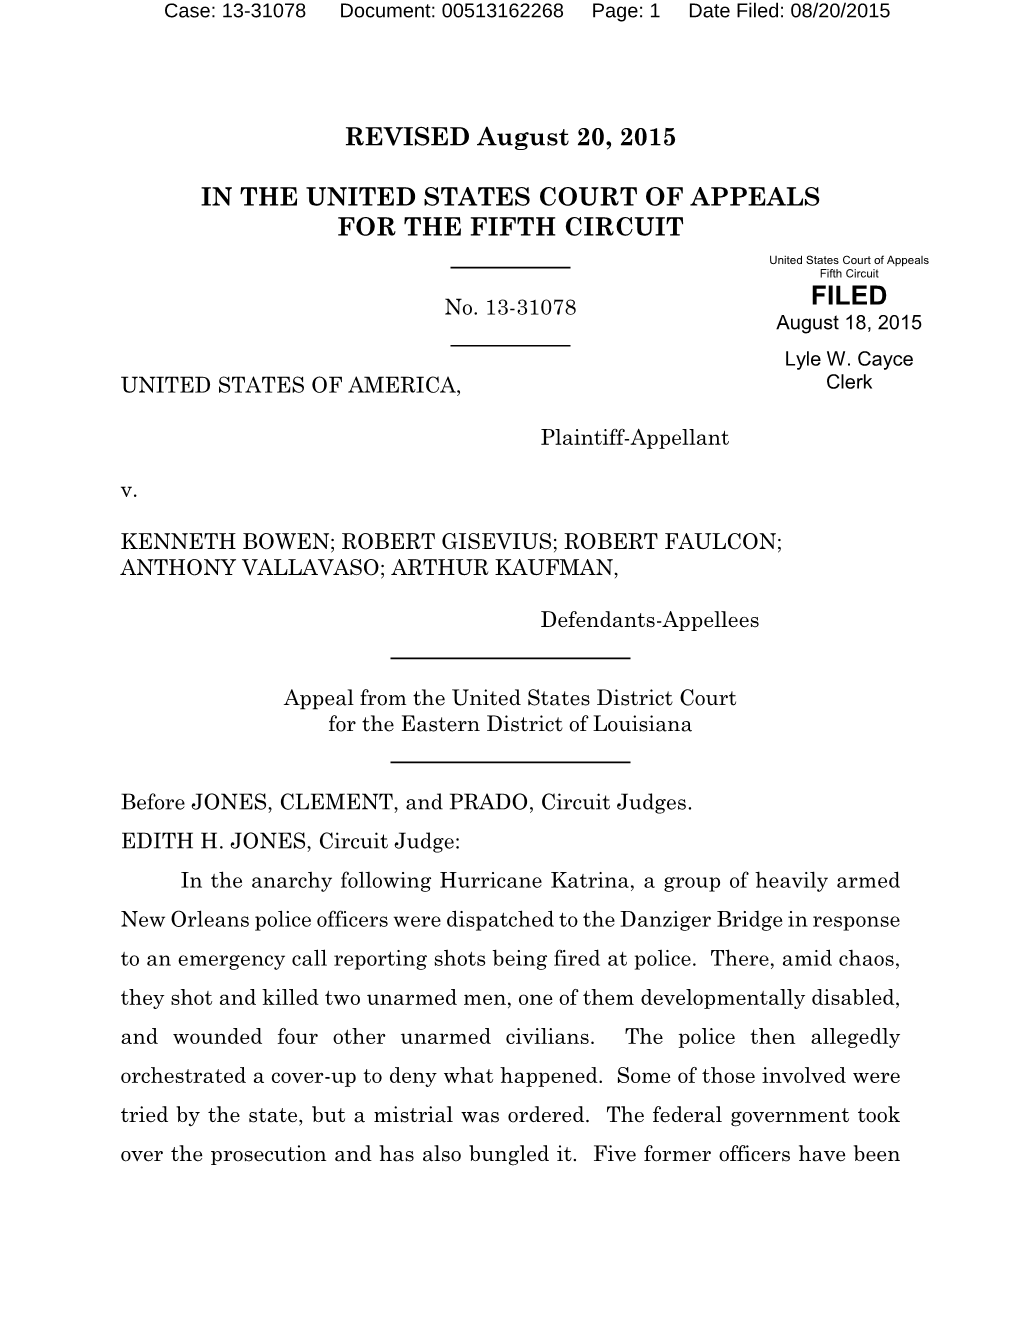 REVISED August 20, 2015 in the UNITED STATES COURT OF